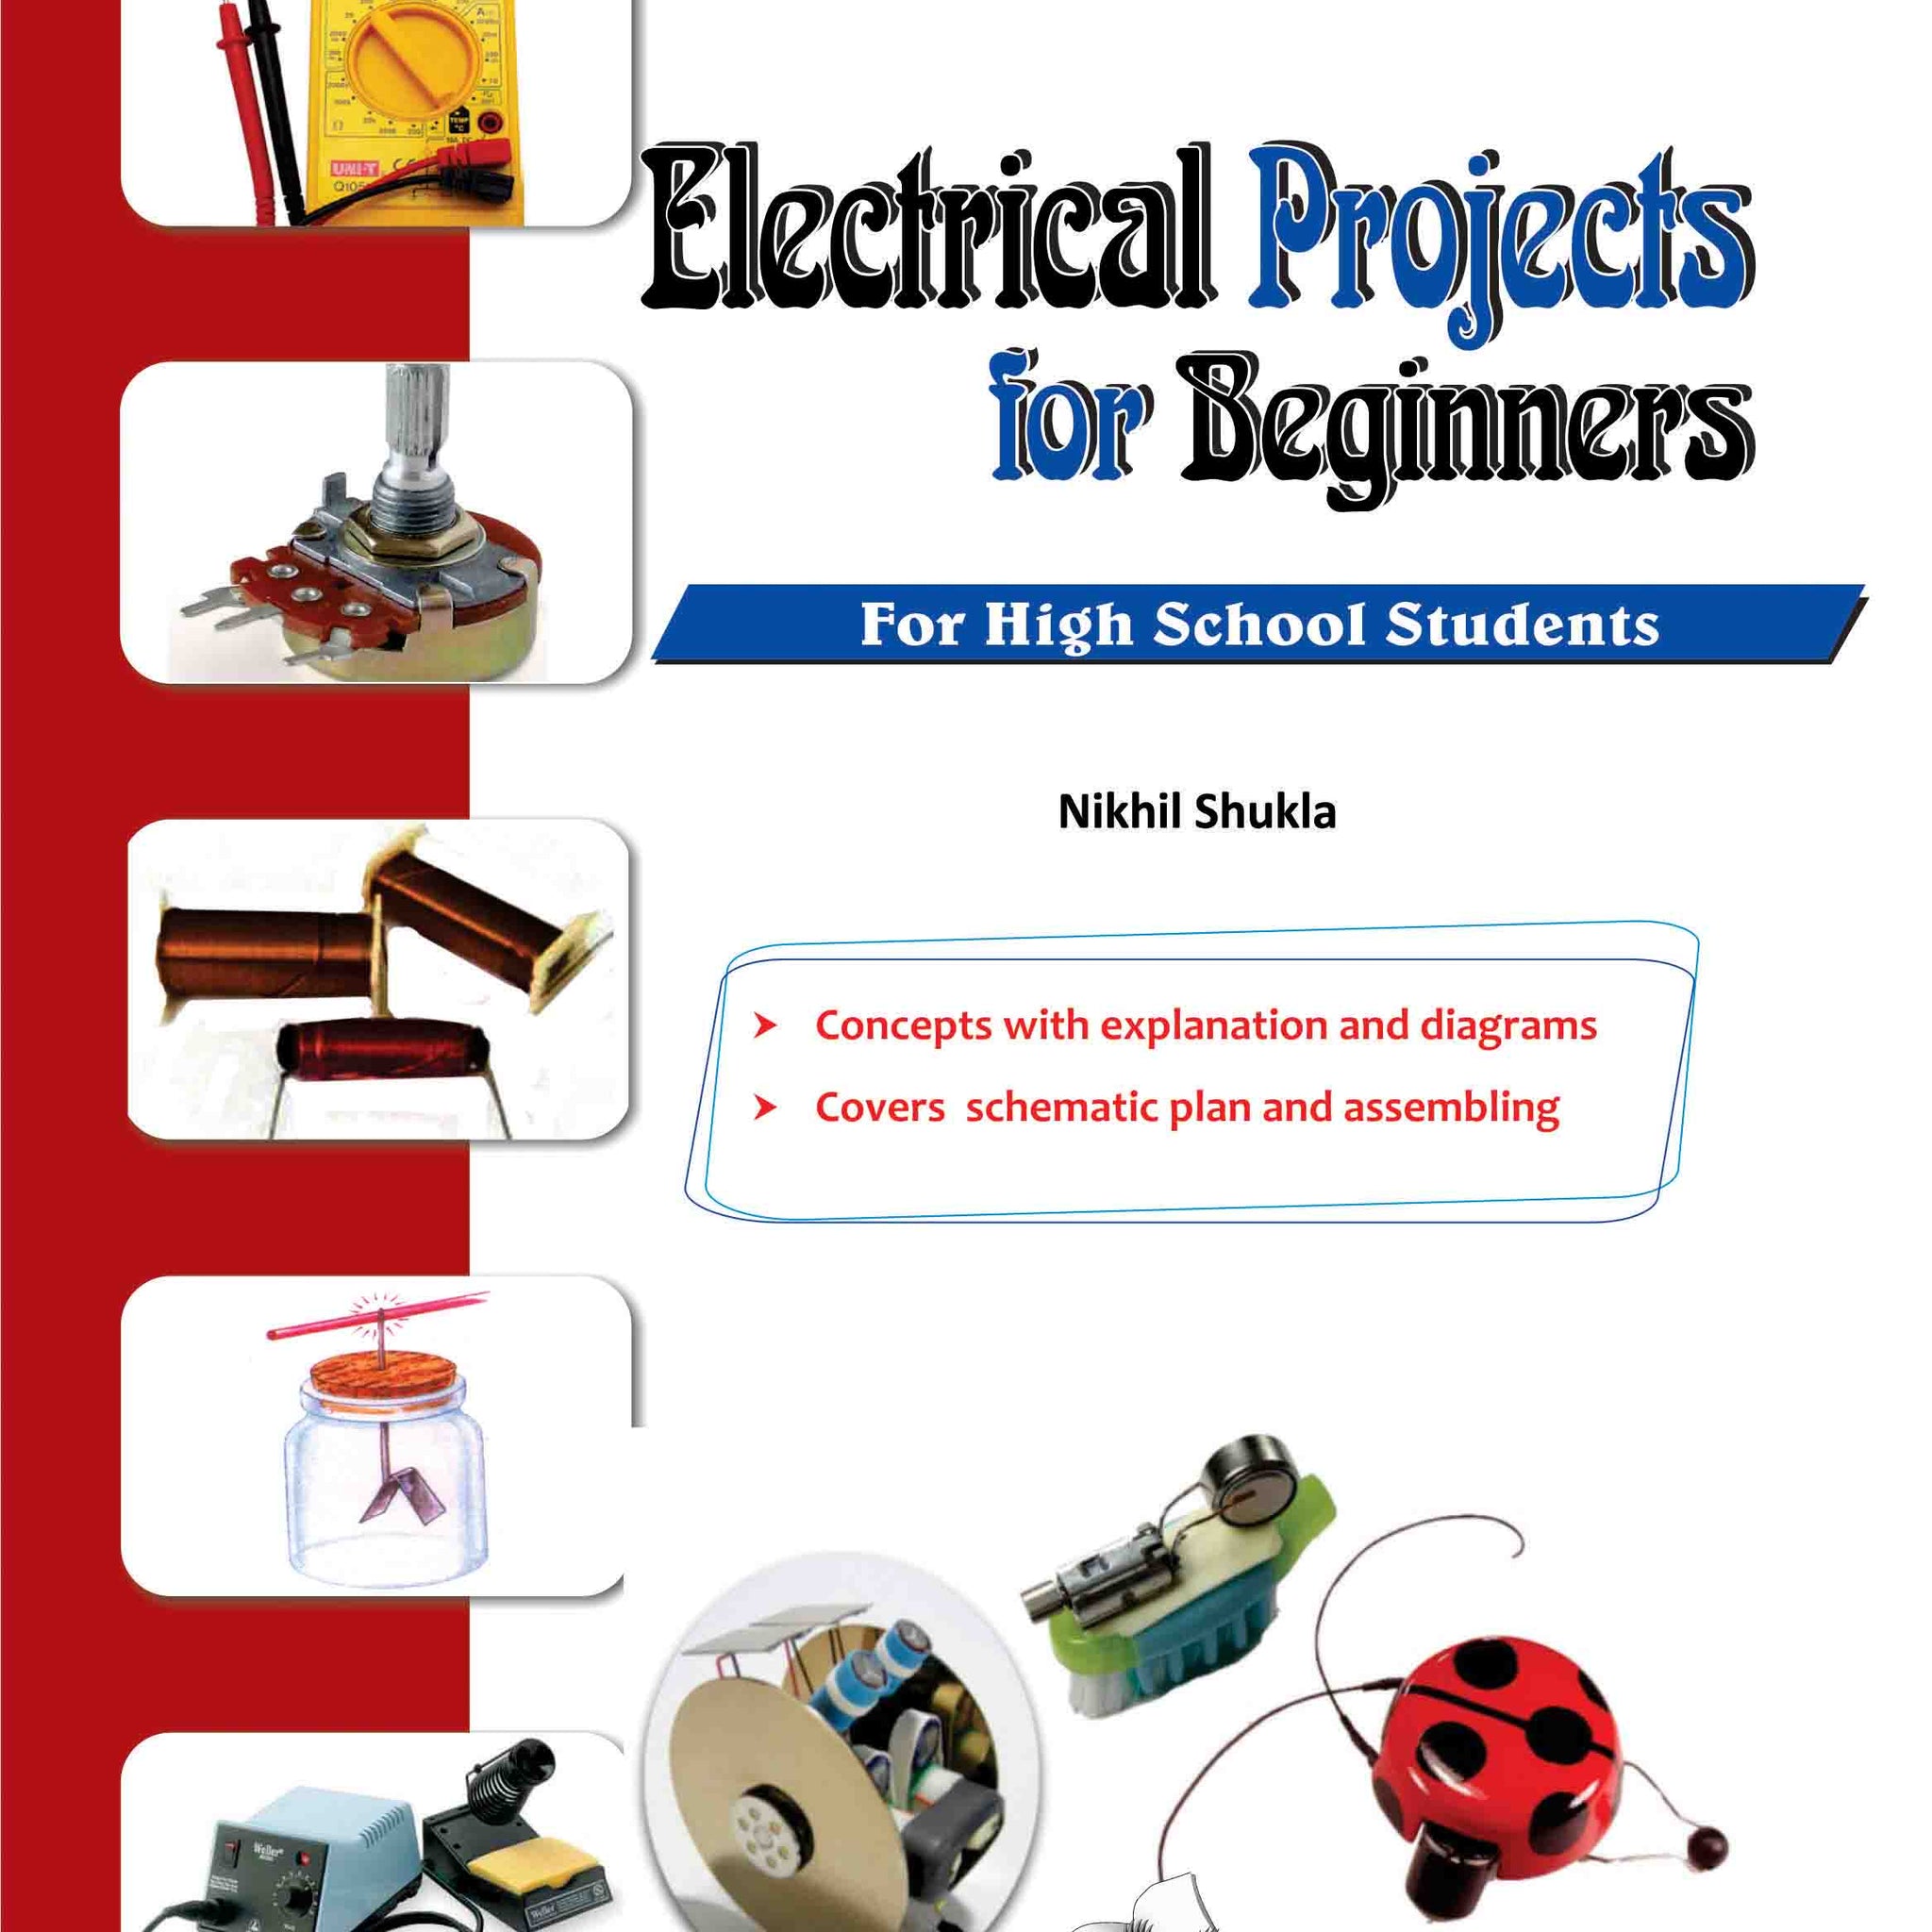 Electrical Projects for Beginners